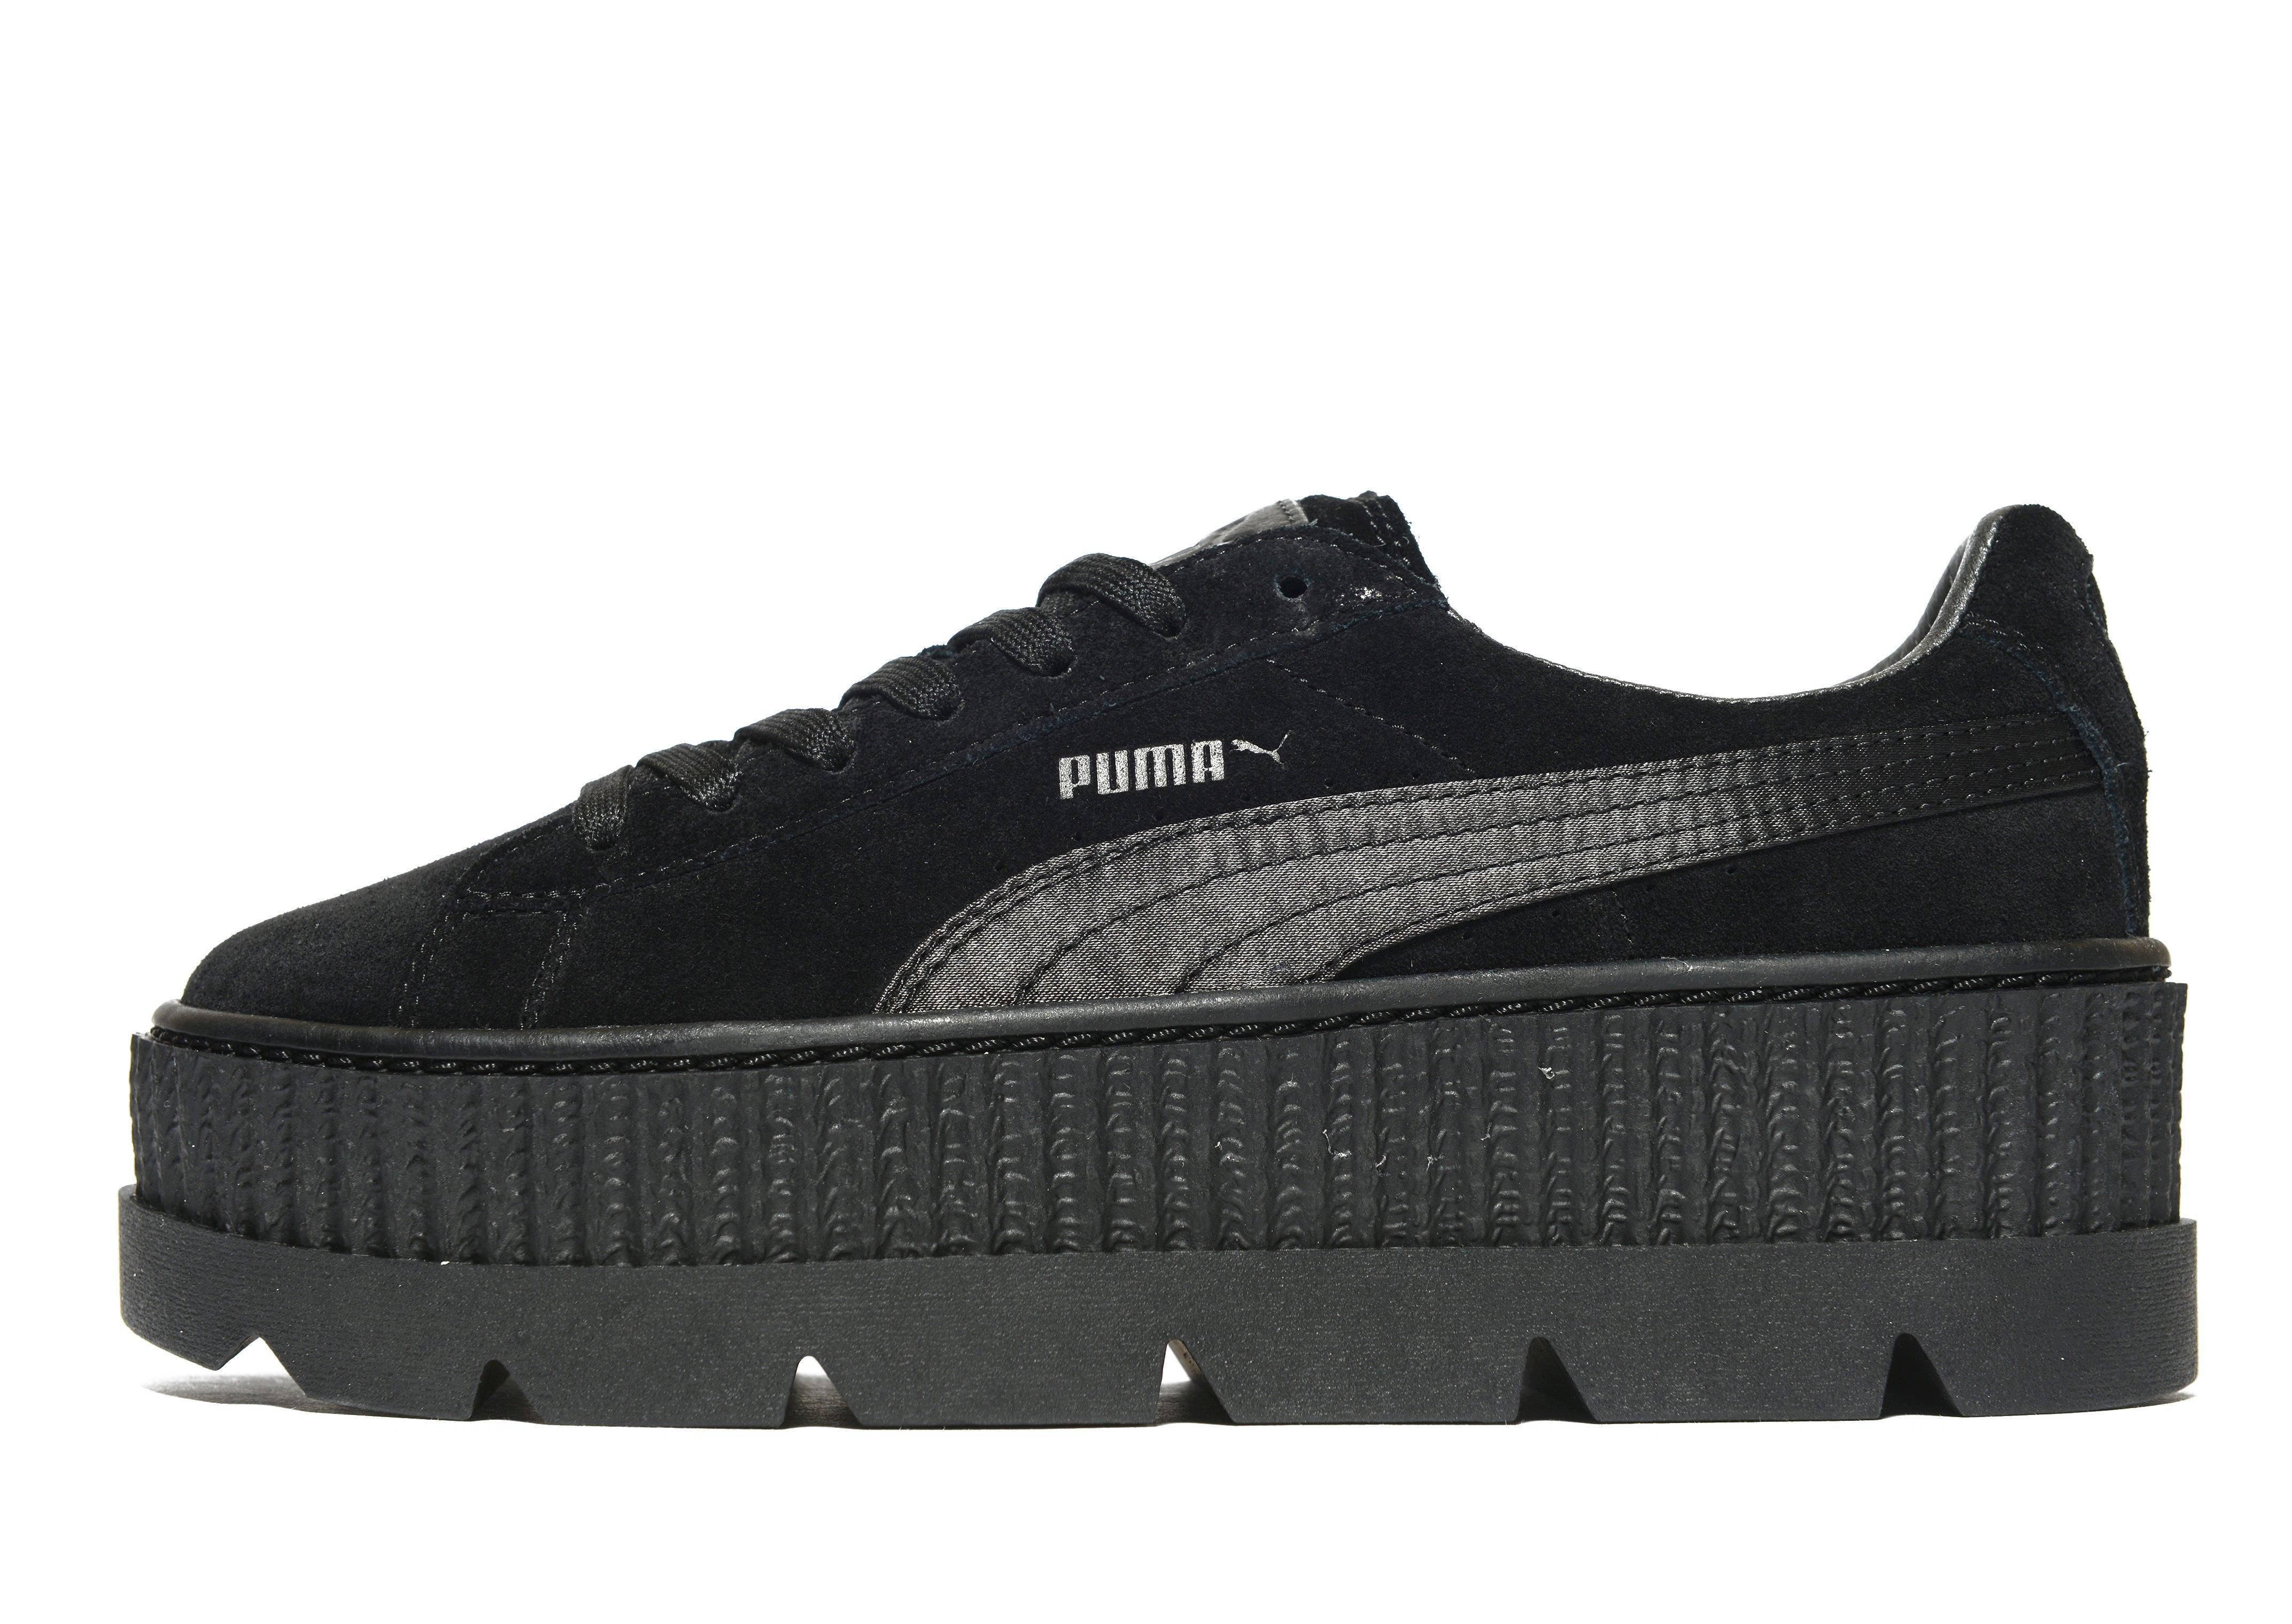 PUMA Suede Fenty Cleated Creepers in Black - Lyst